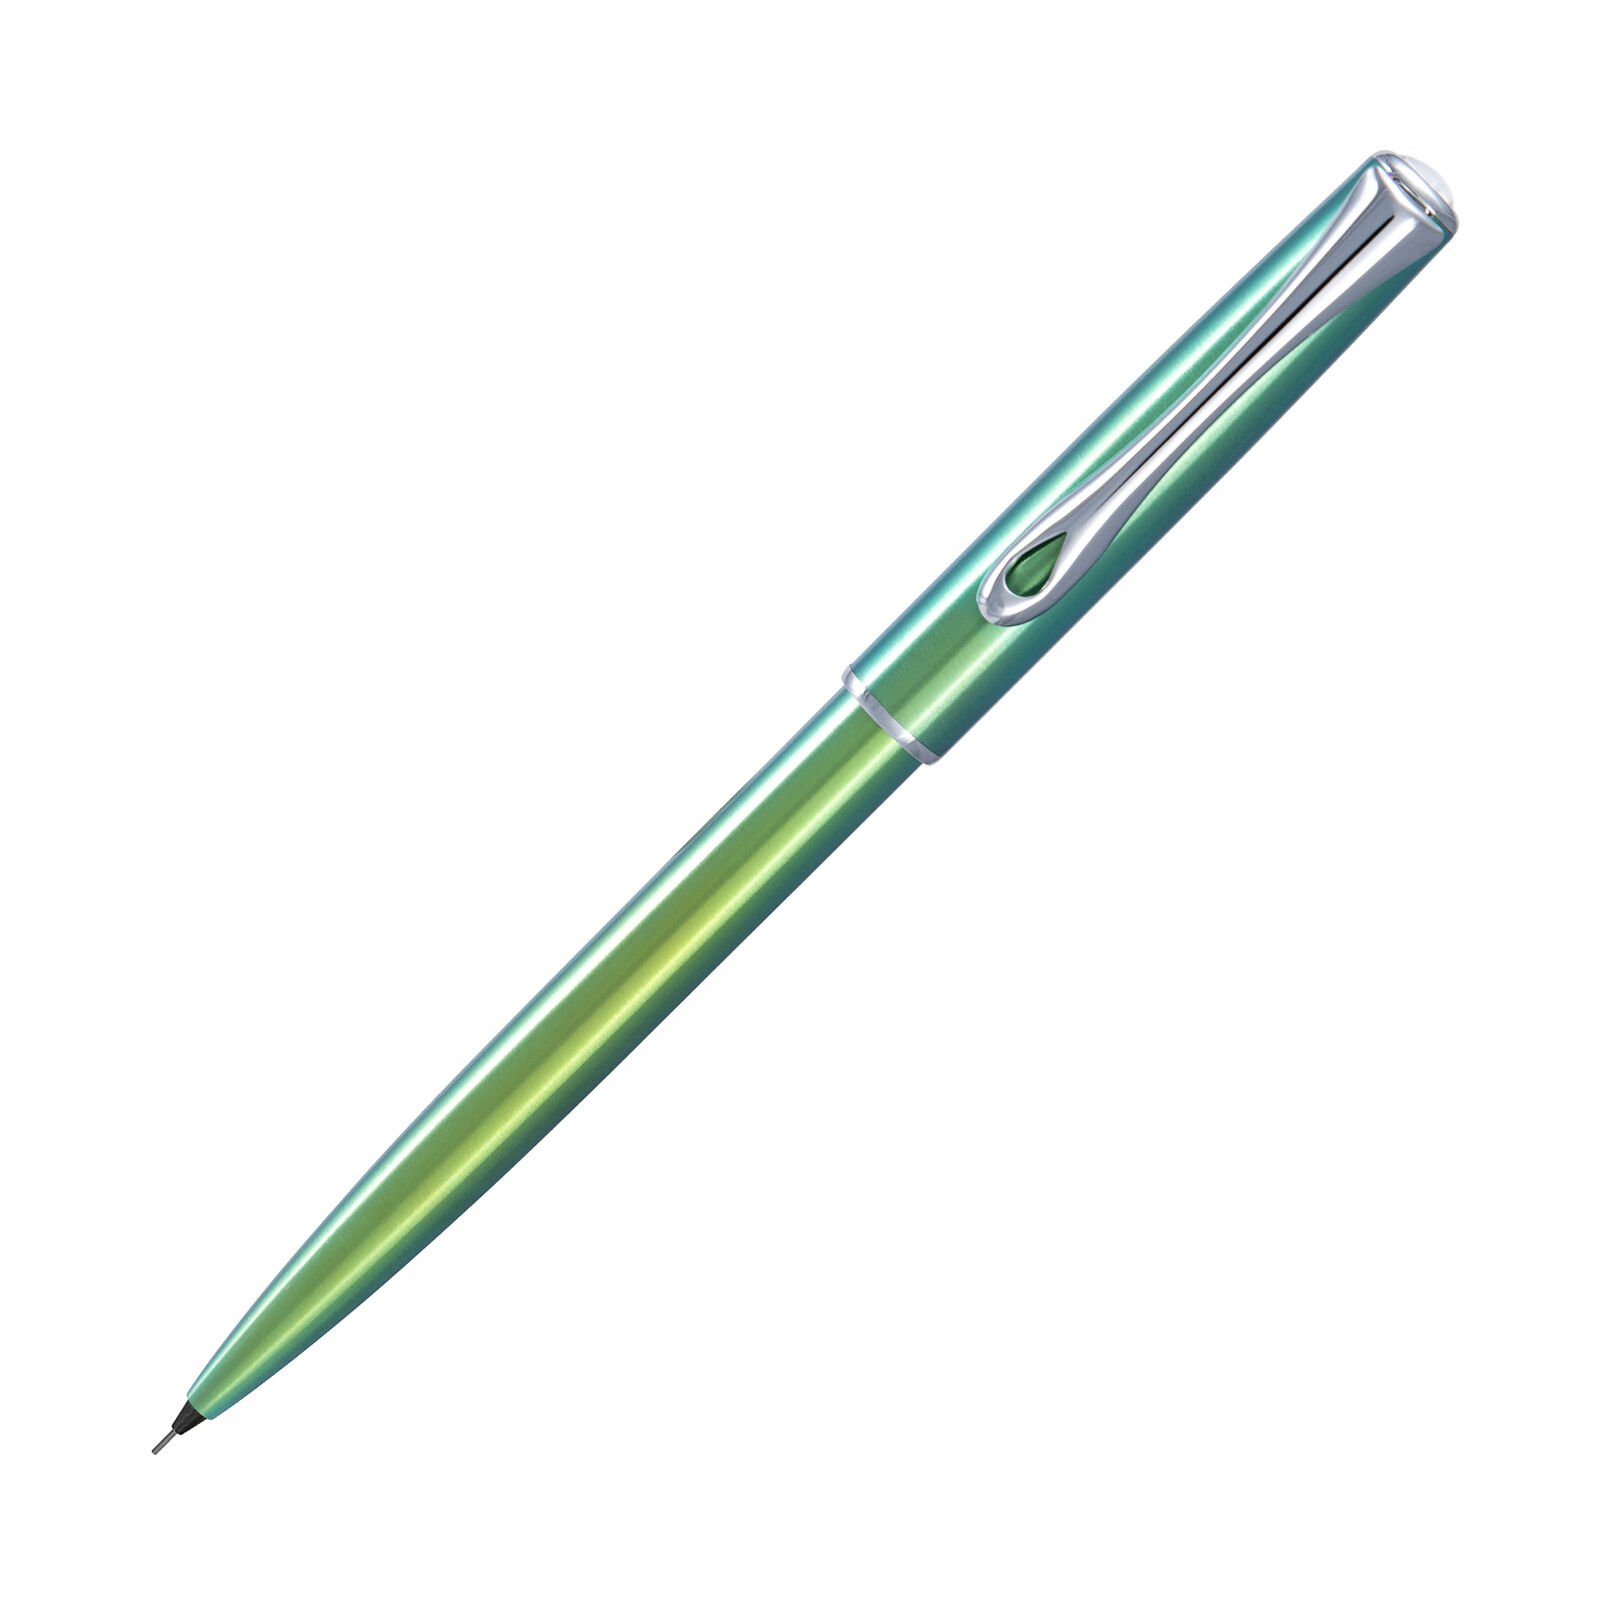 Diplomat Traveller Mechanical Pencil in Funky Green - 0.5mm - NEW in Box